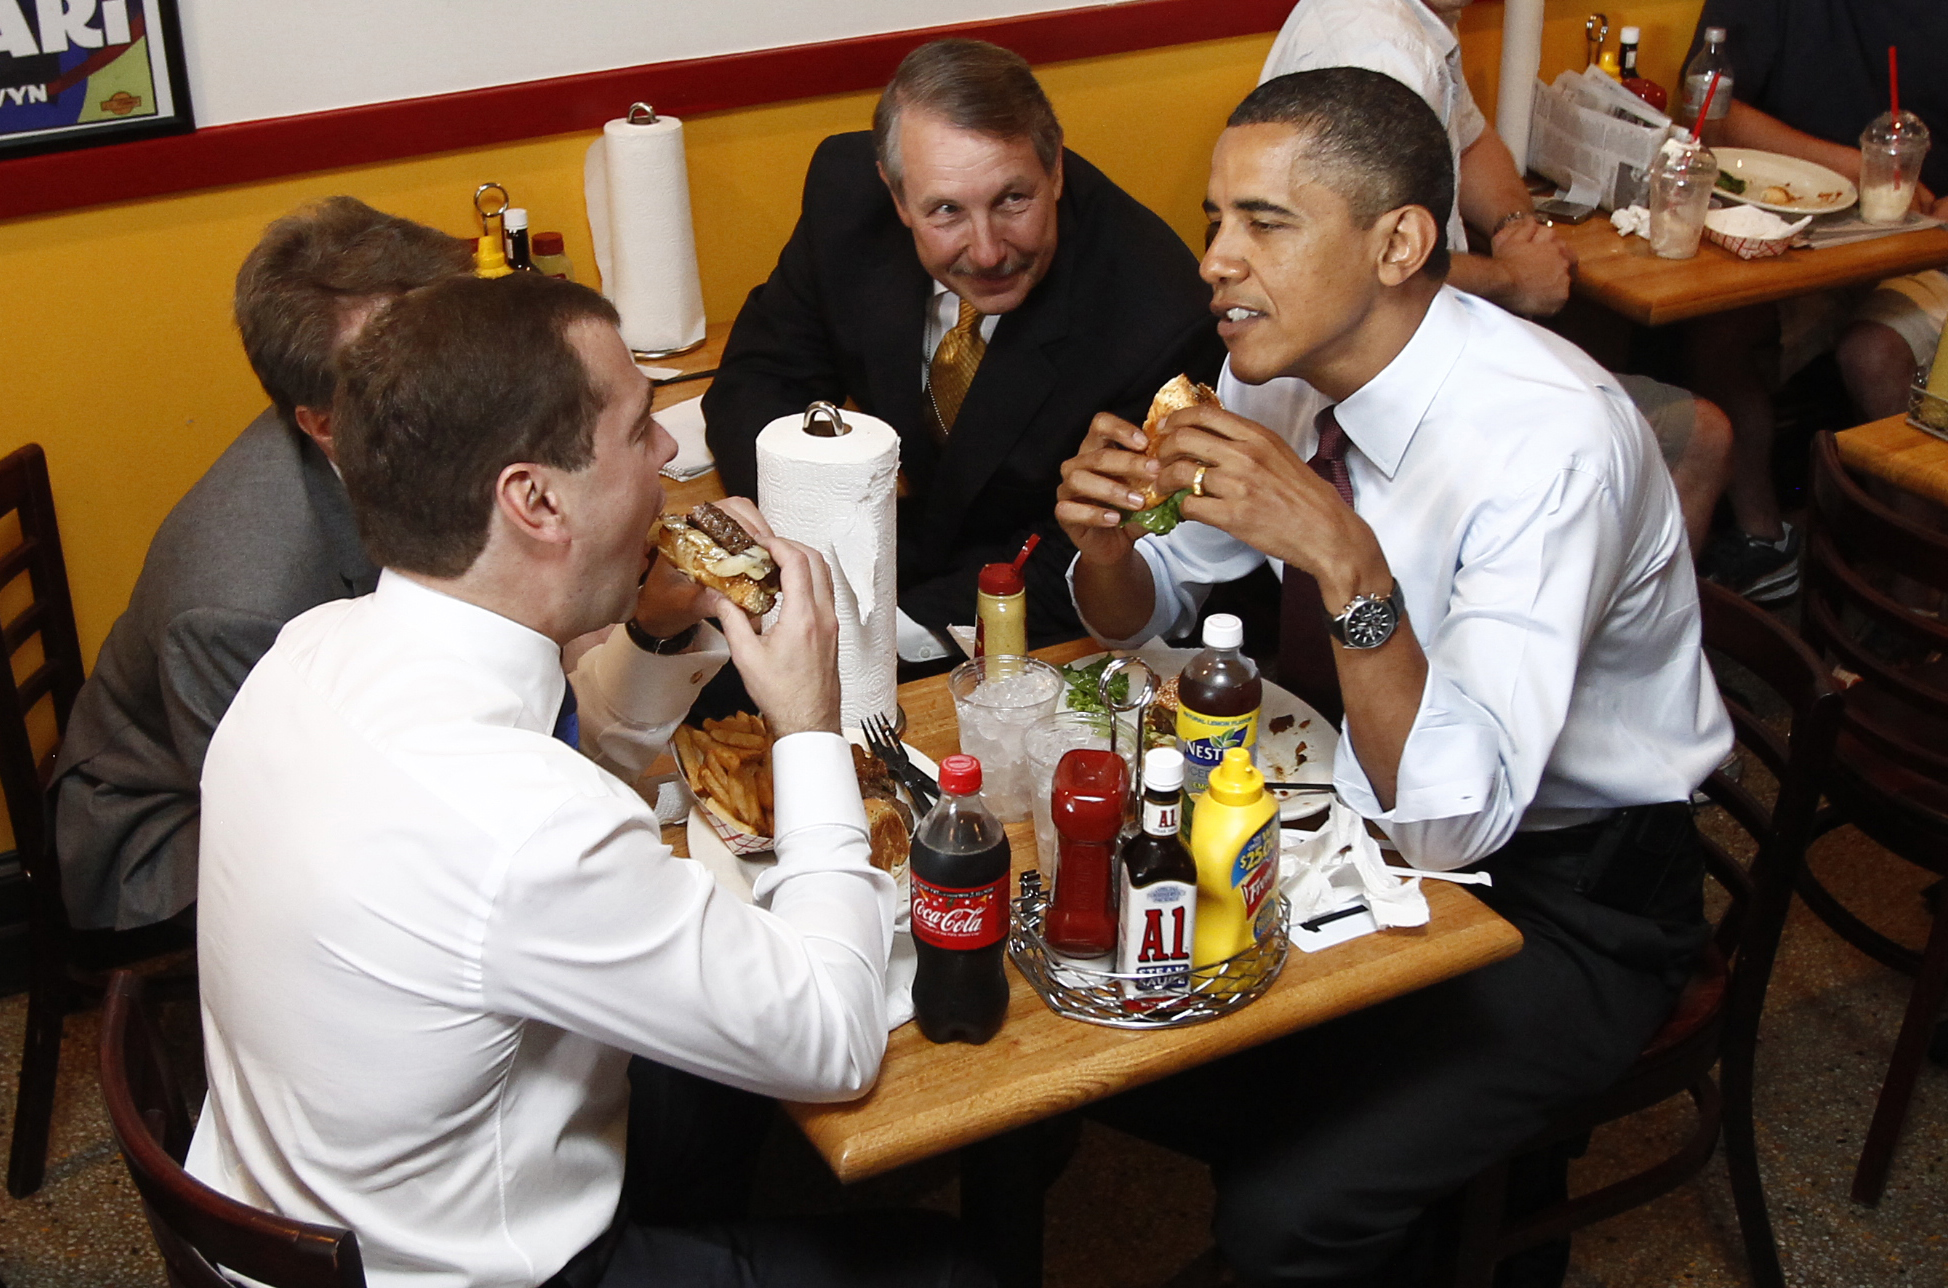 Barack Obama and Russia's President Dmitry Medvedev have burgers at Ray's Hell Burger restaurant in Arlington, Virginia, June 24, 2010.